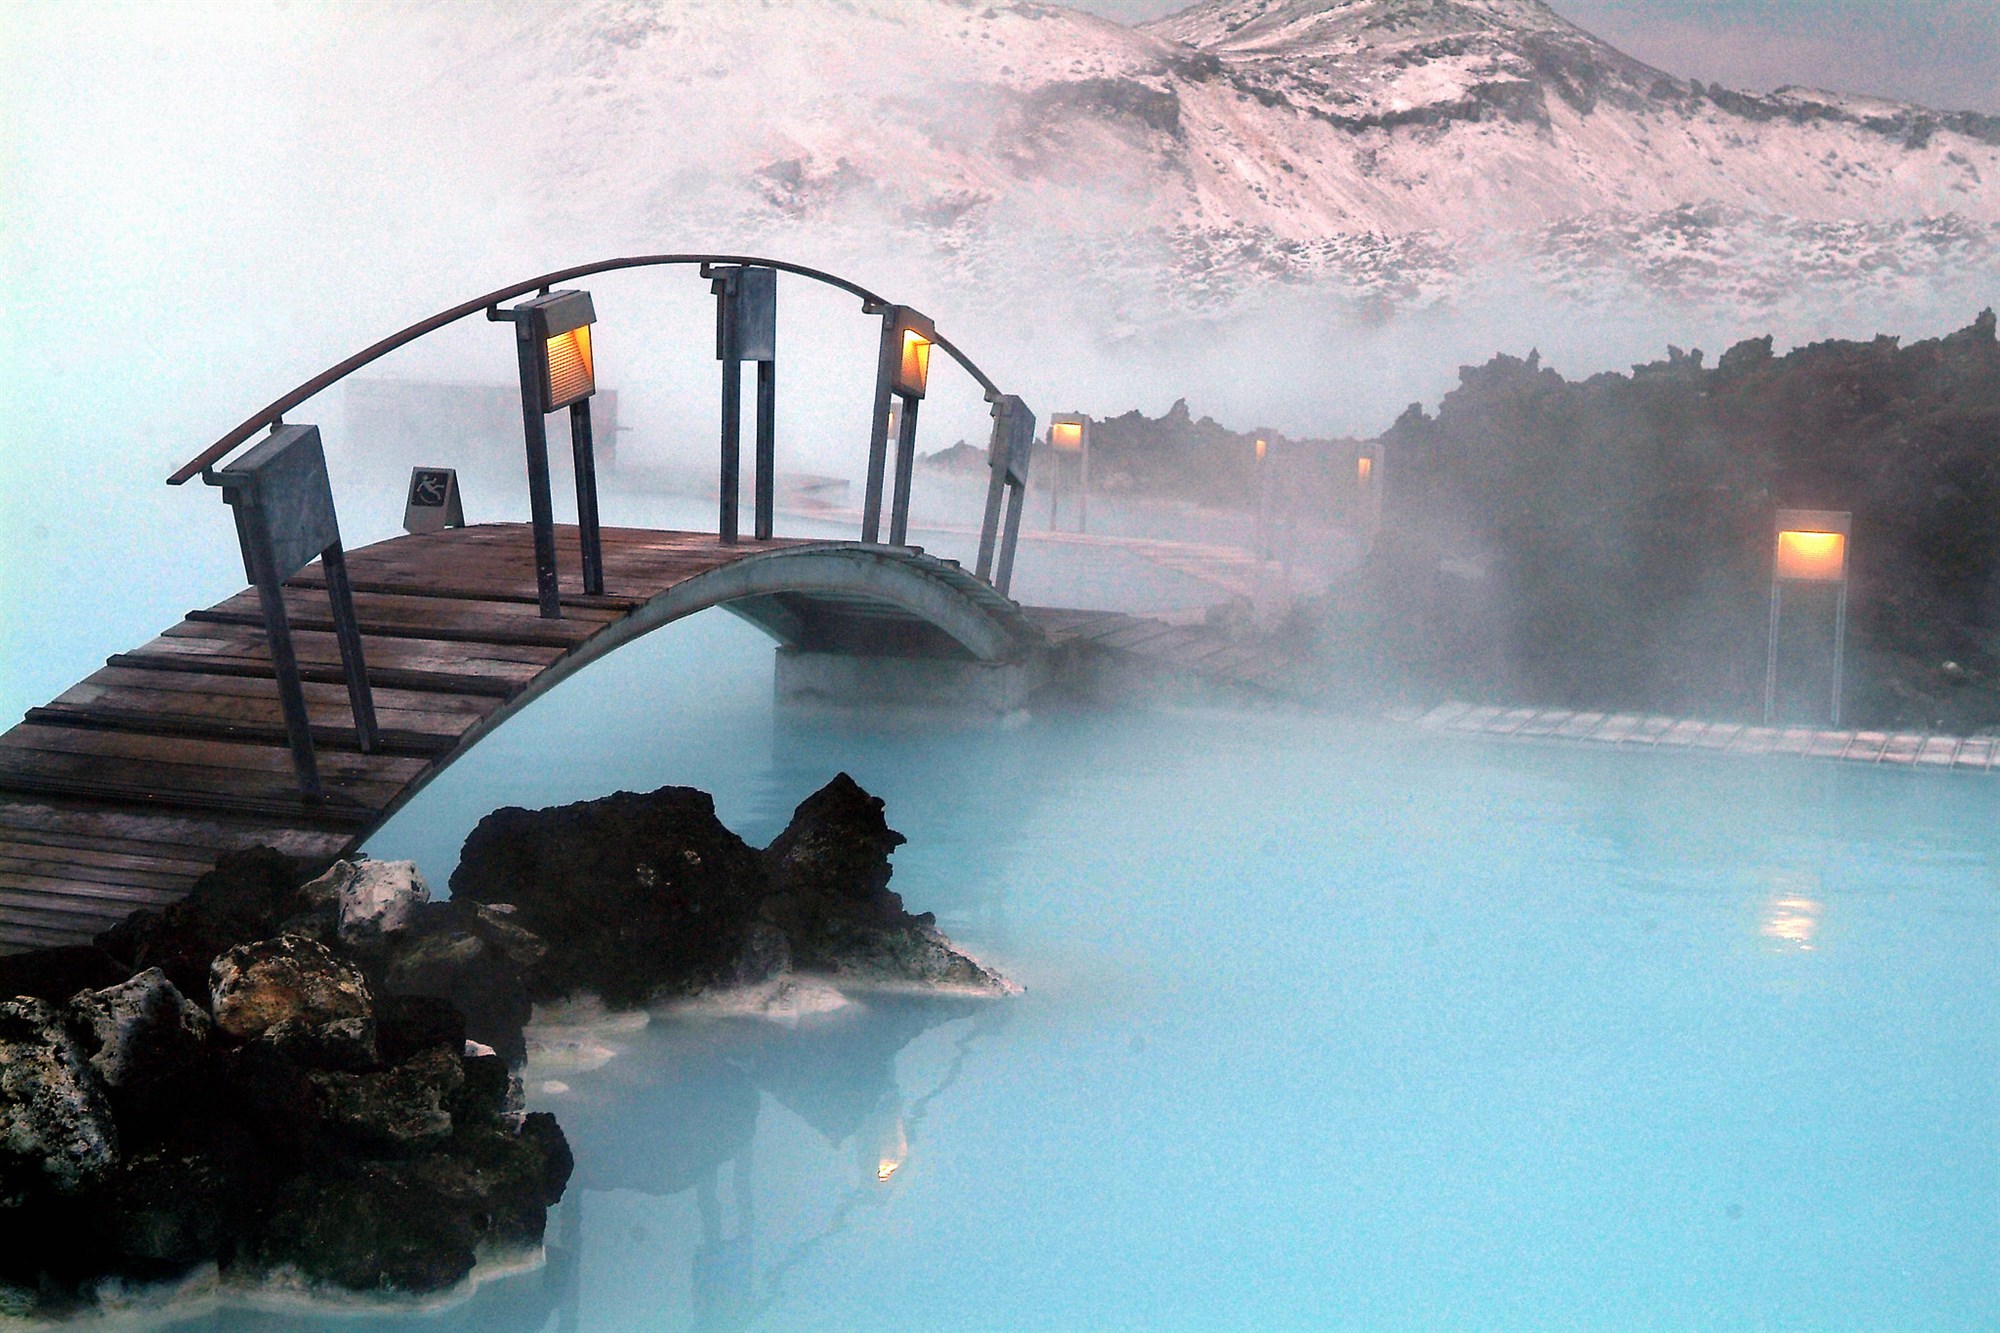 Blue lagoon iceland, blue water with a wooden bridge